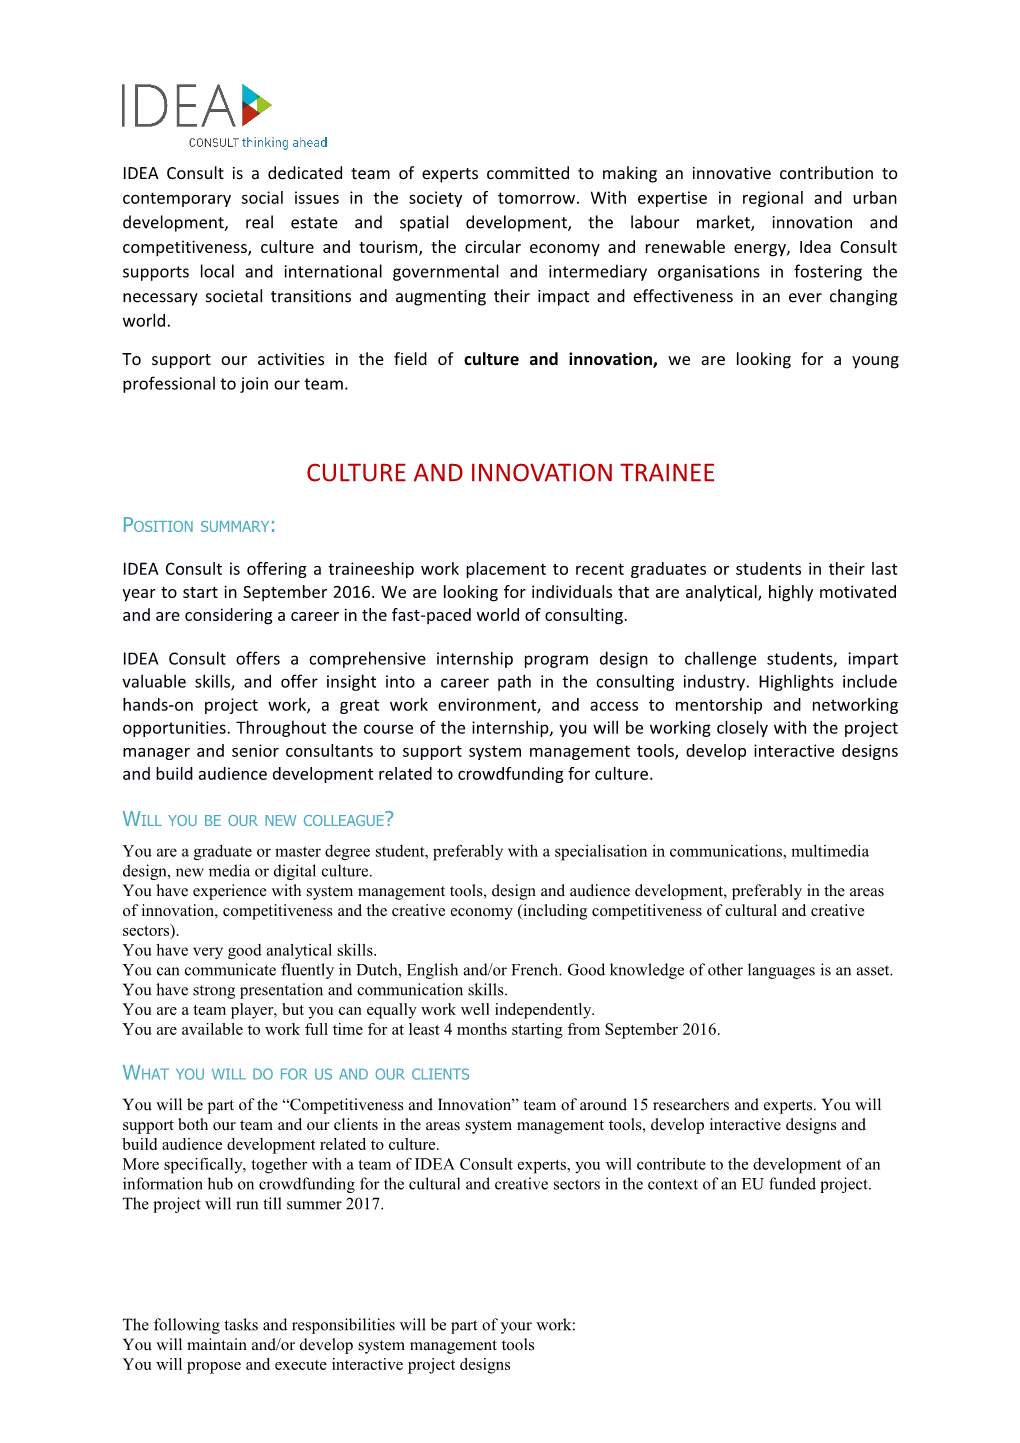 Culture and Innovation Trainee